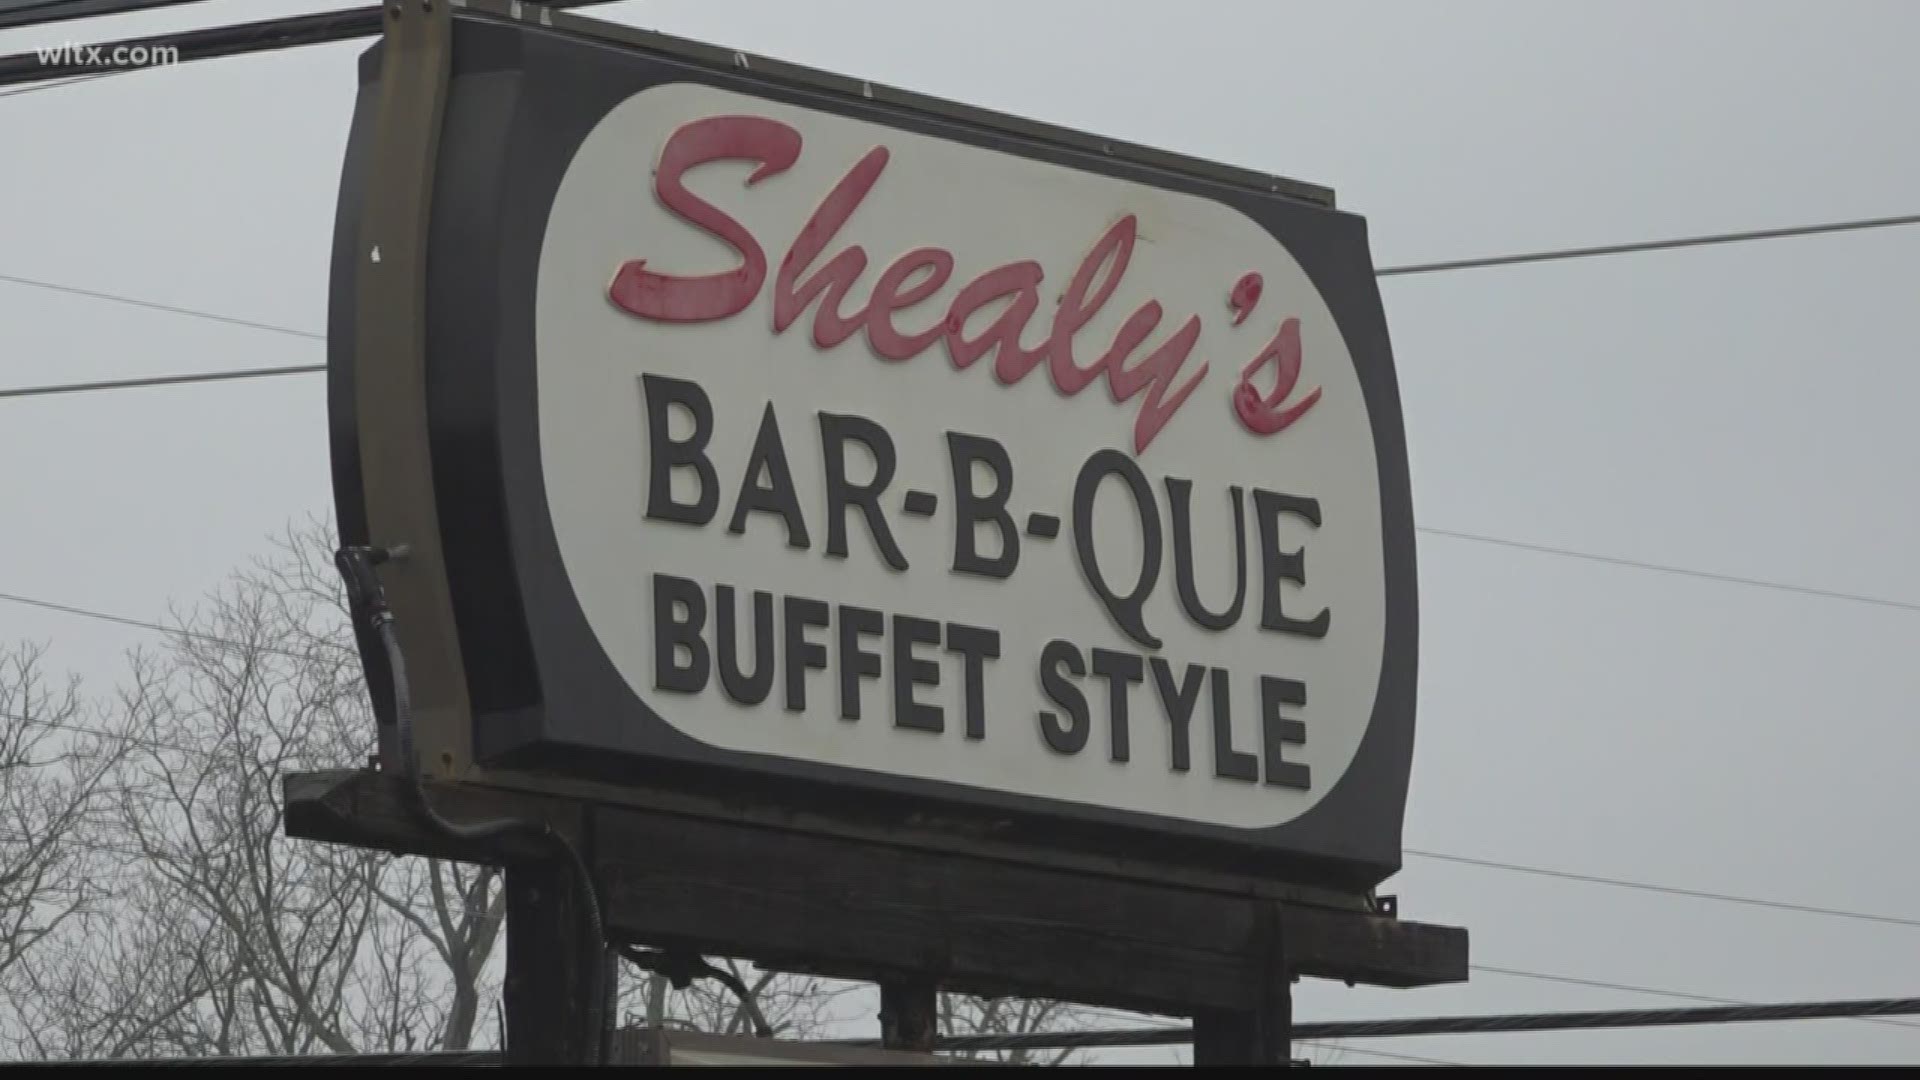 For Shealy's, it's like going back to their roots because their first restaurant was originally a roadside pickup stand.